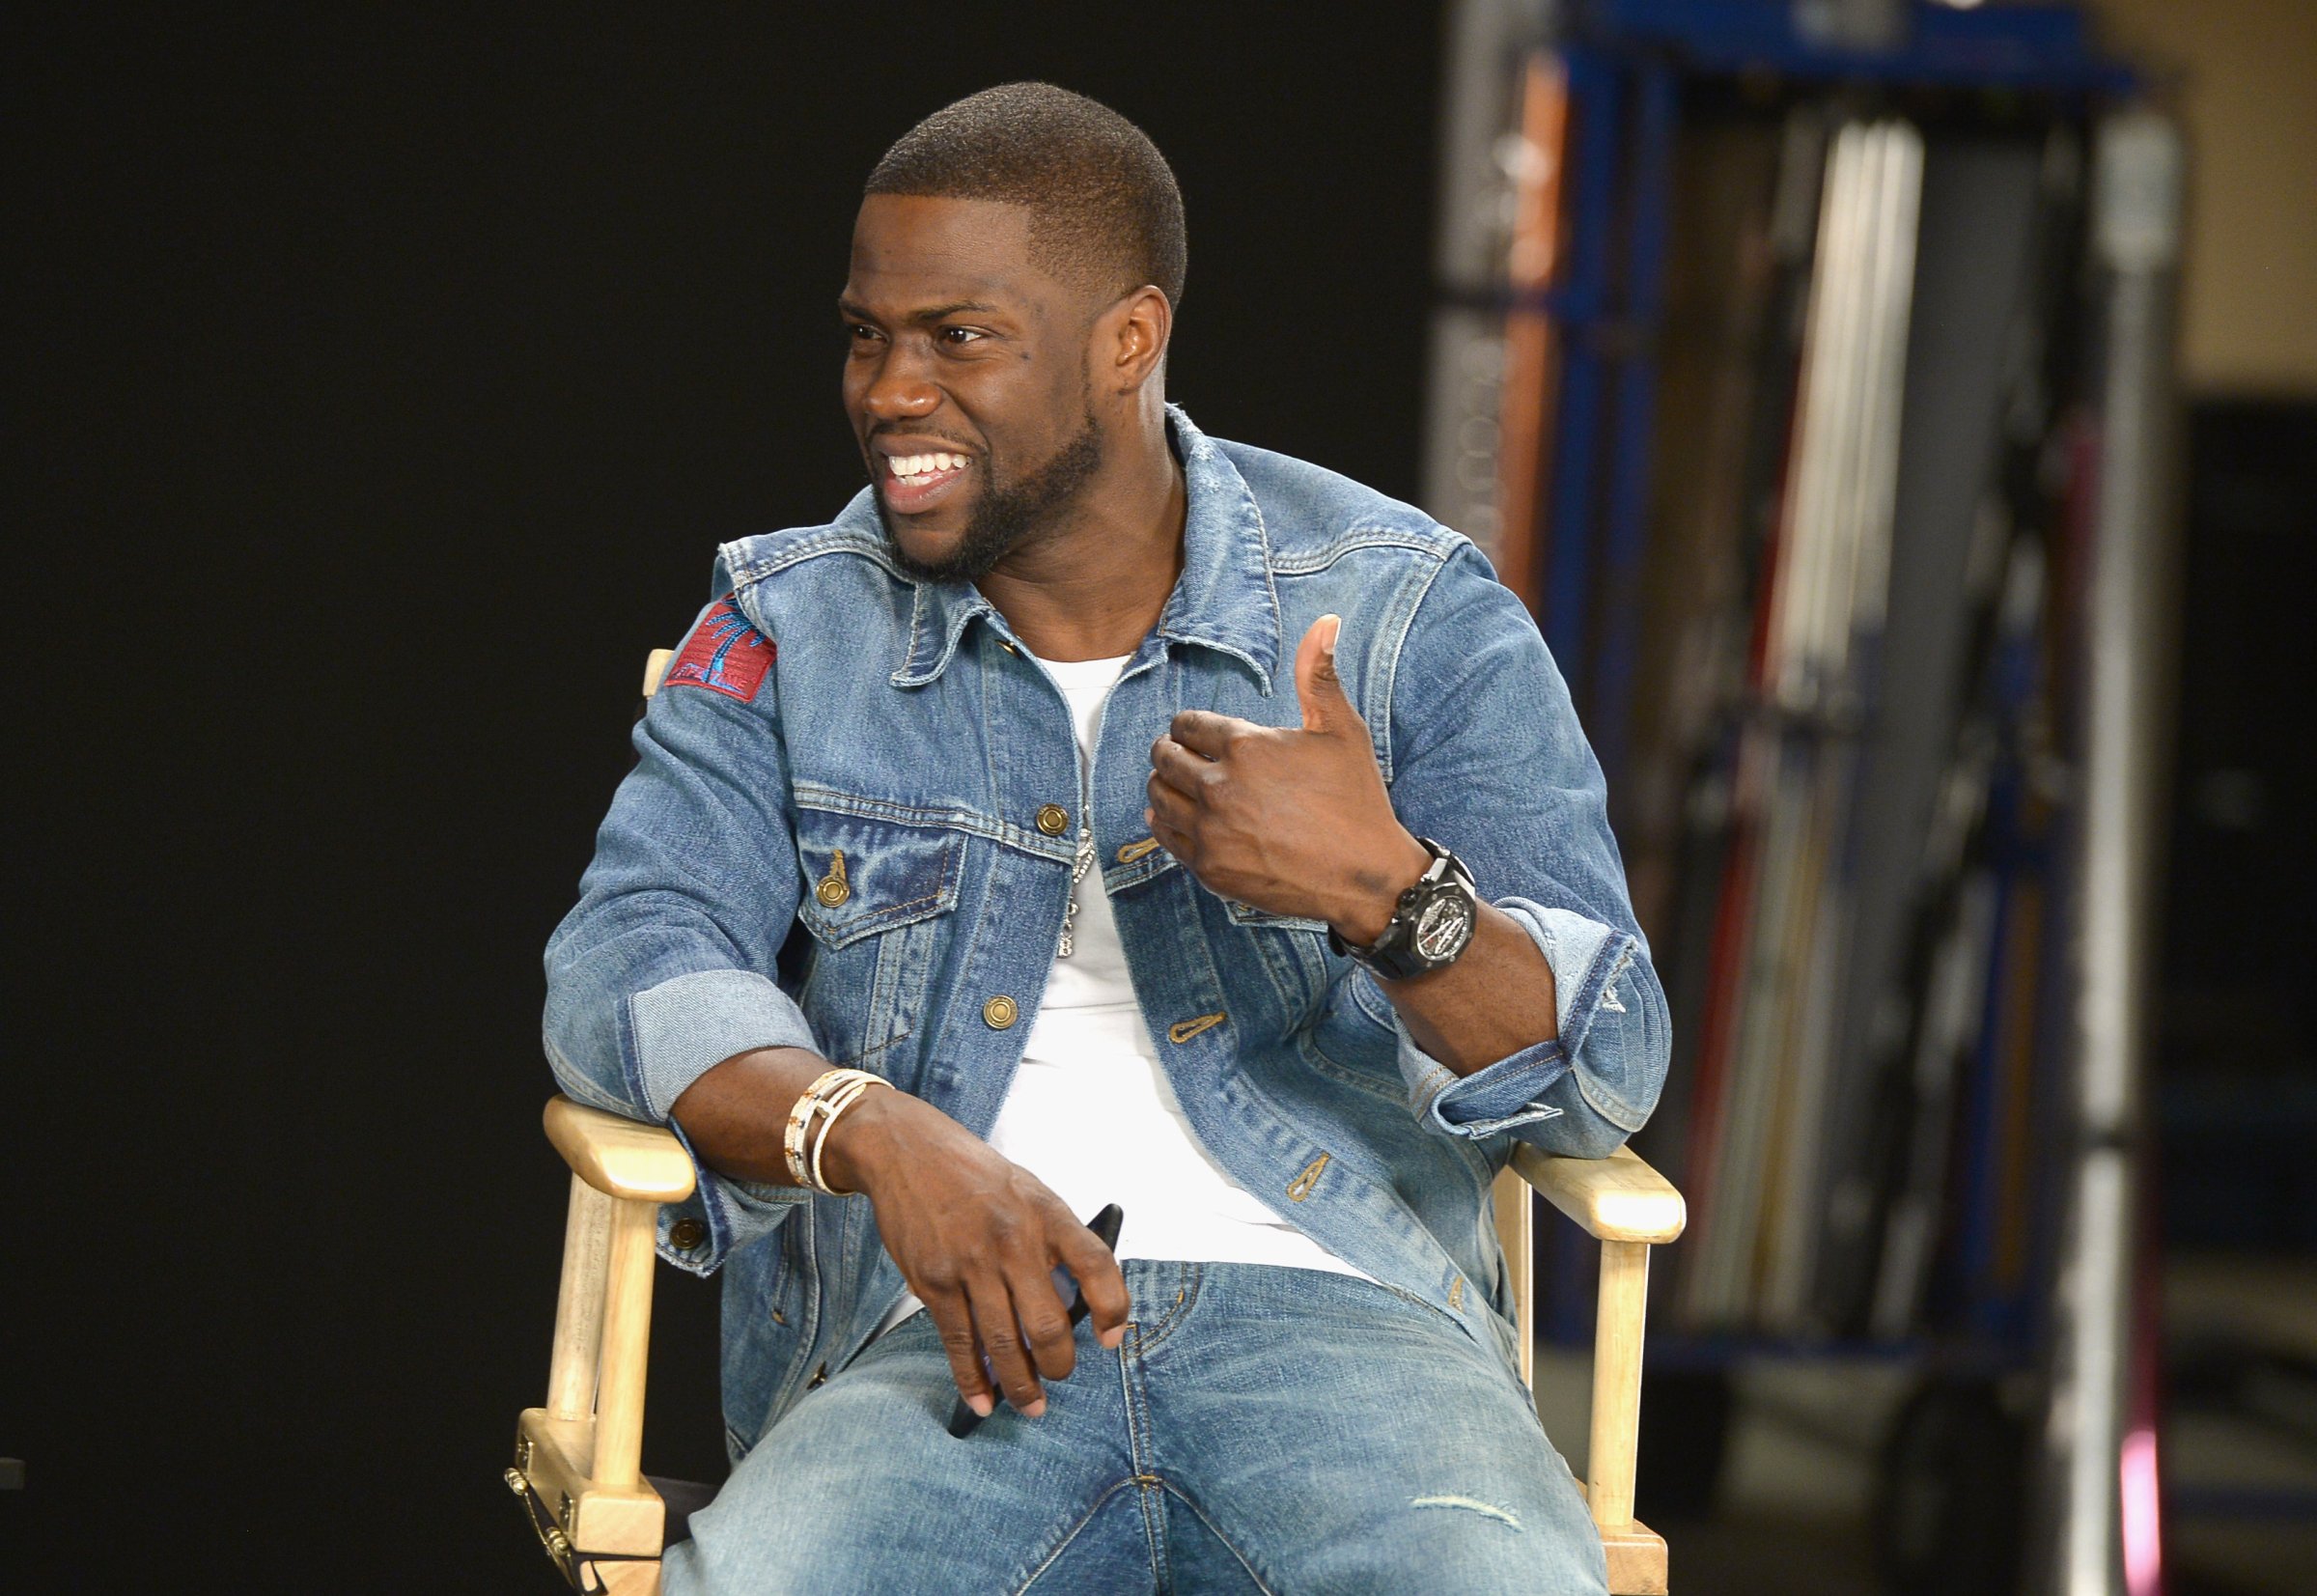 Kevin Hart preps to host the 2016 MTV Movie Awards at The Edition on February 20, 2016 in Miami Beach, Florida.